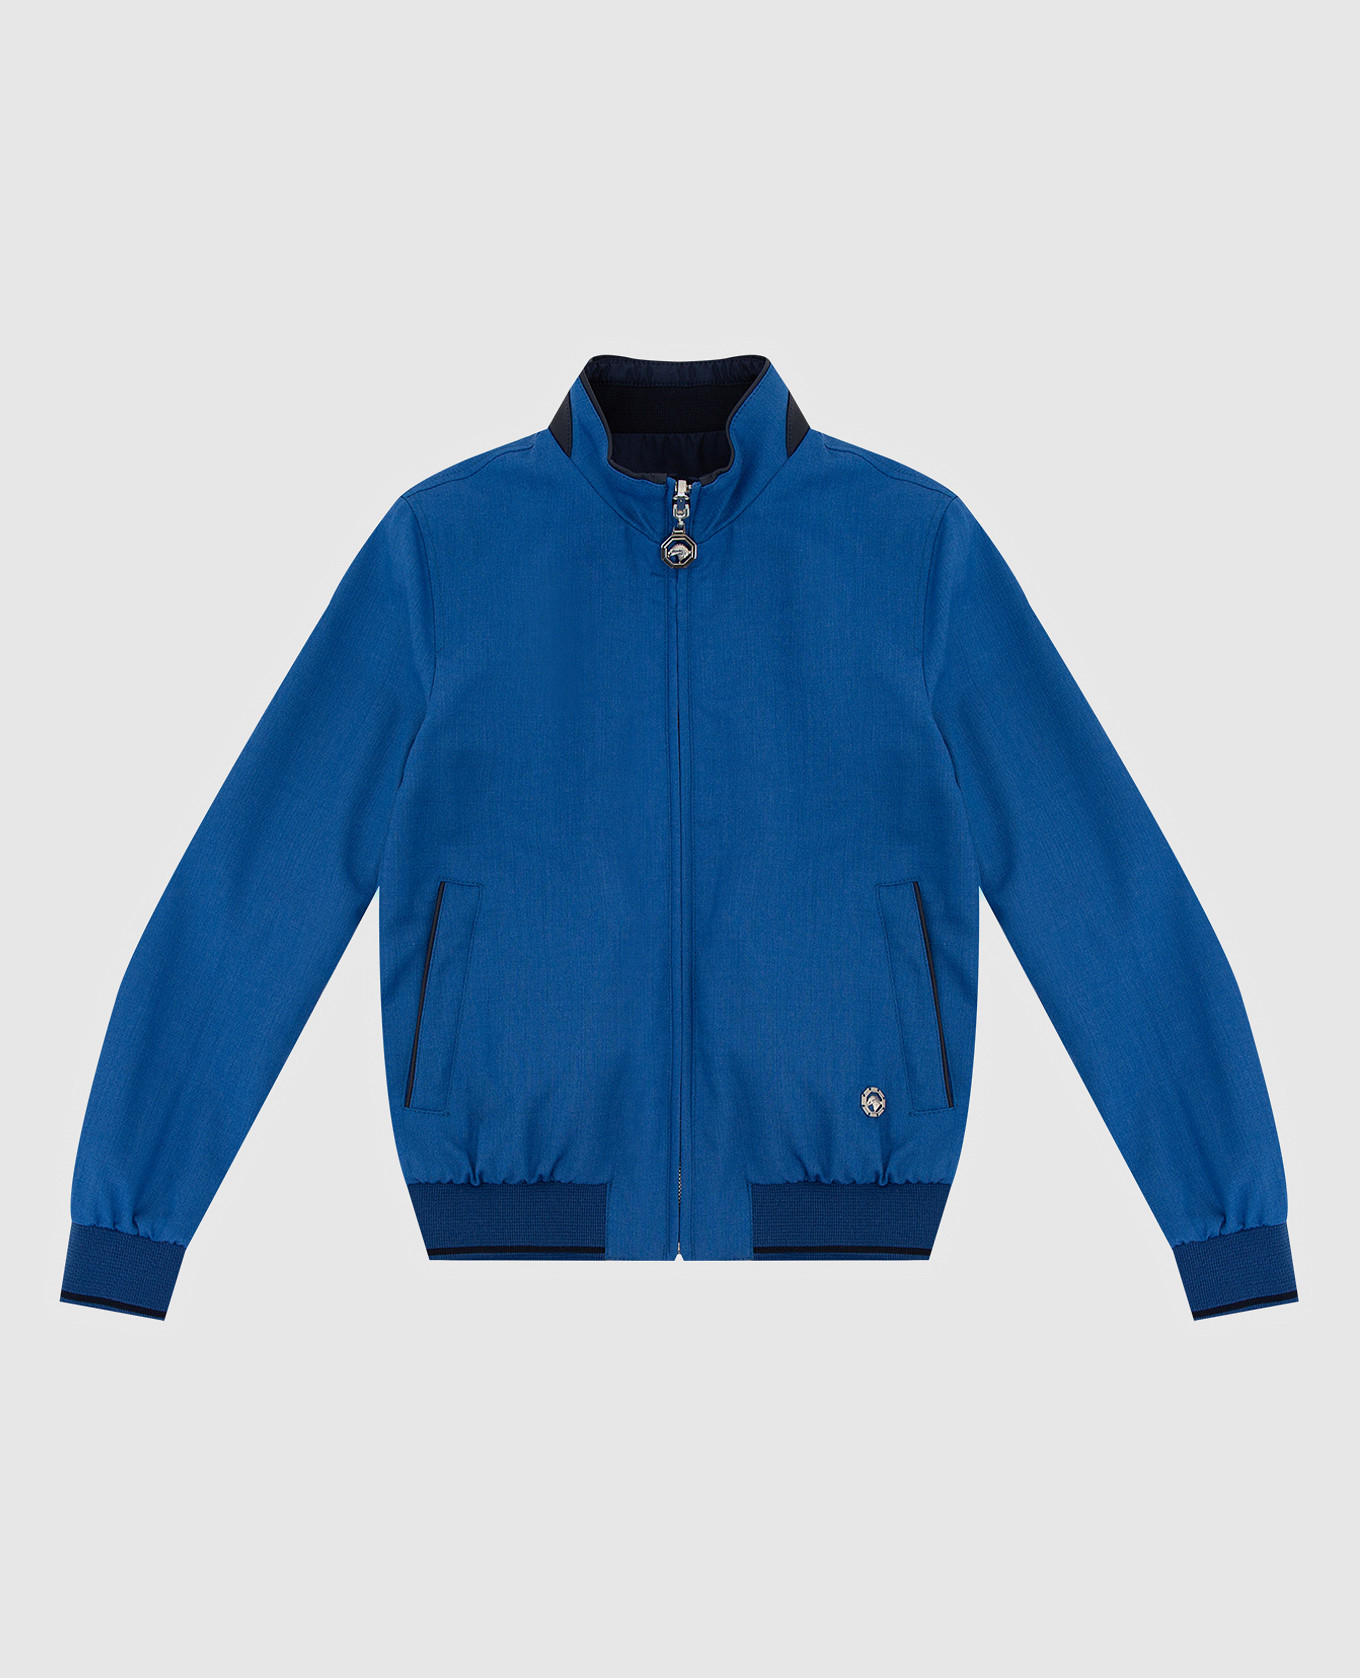 Reversible blue jacket for children in wool, cashmere and silk